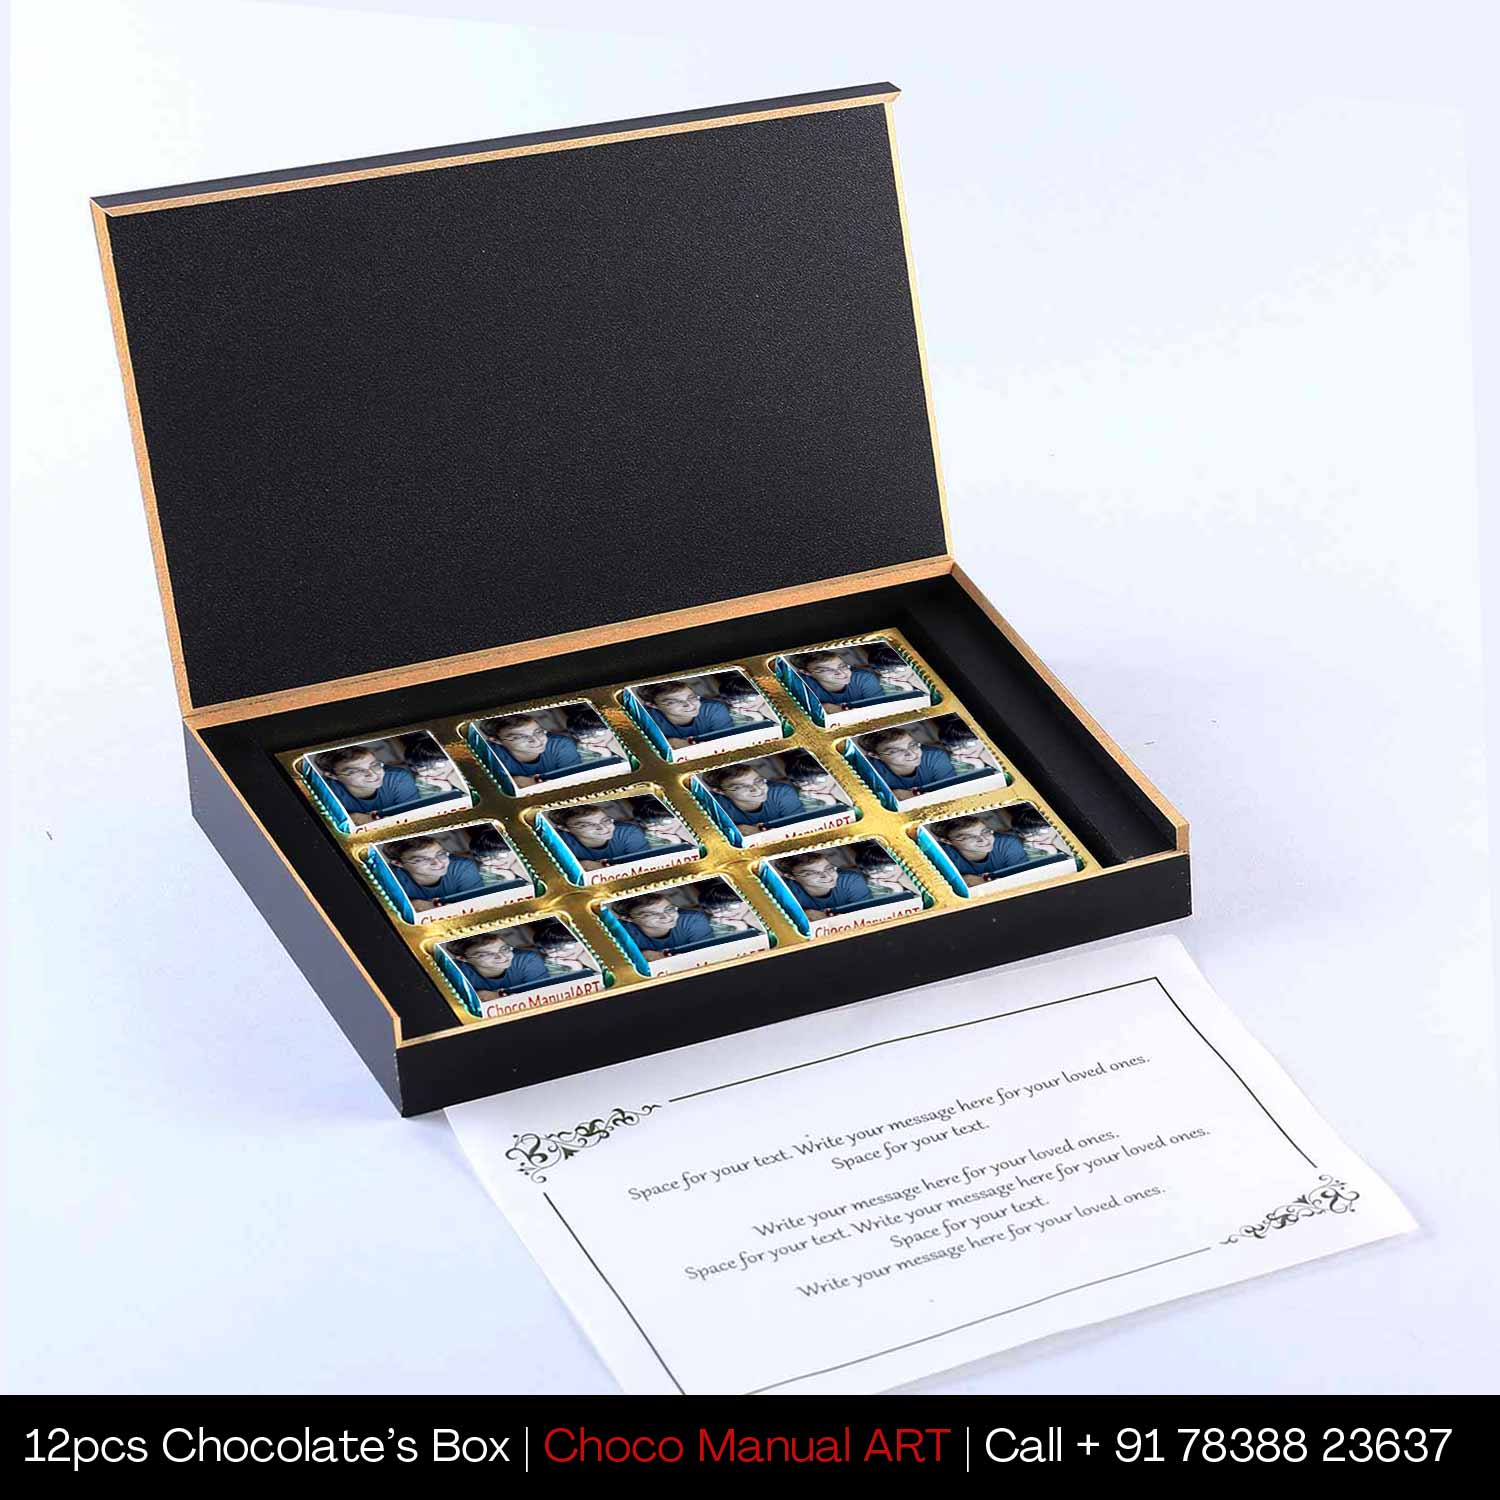 Happy father's day printed wrapped Chocolates Designer black box